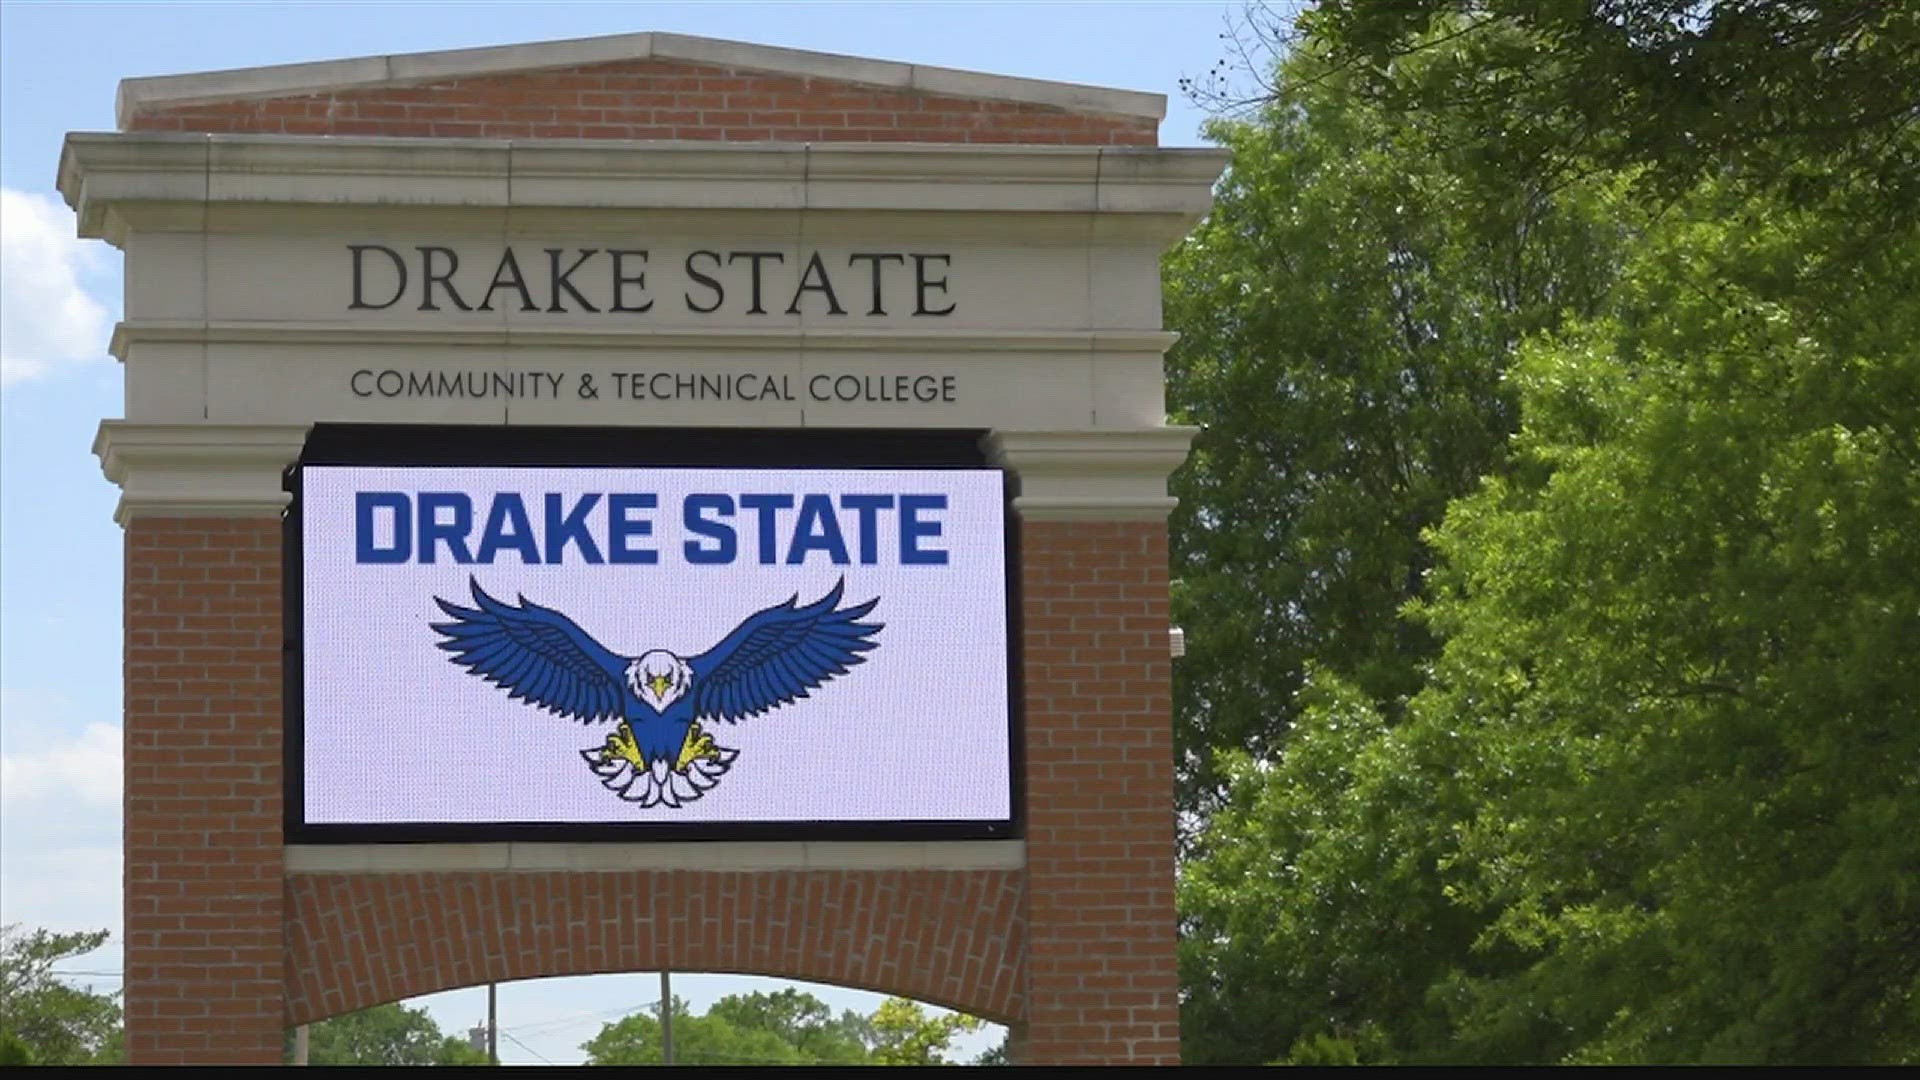 Officials at Drake State Community & Technical College discuss their plans to hire police presence on campus.